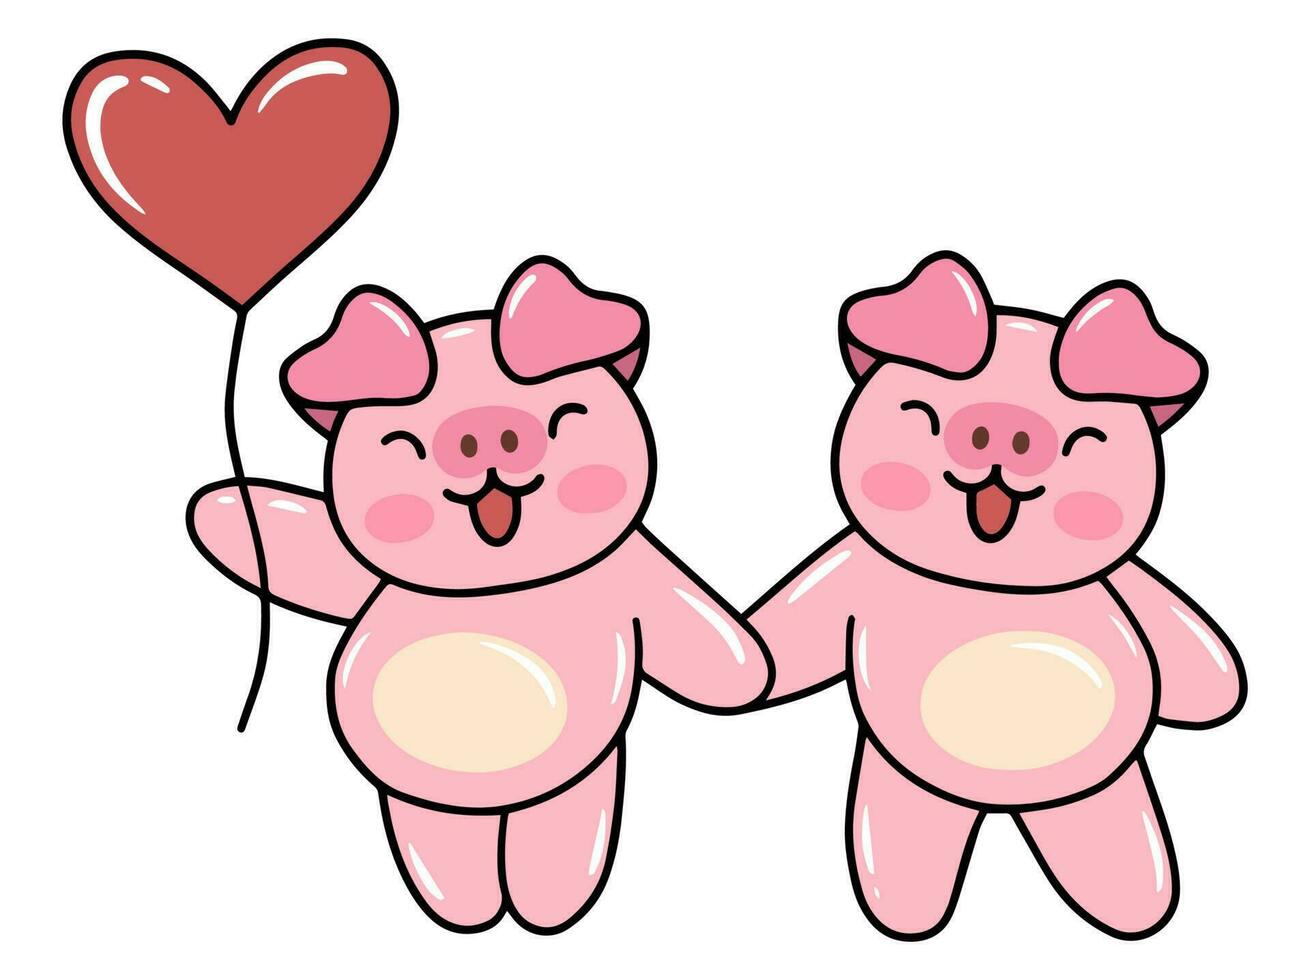 Pig Cartoon Cute for Valentines Day vector